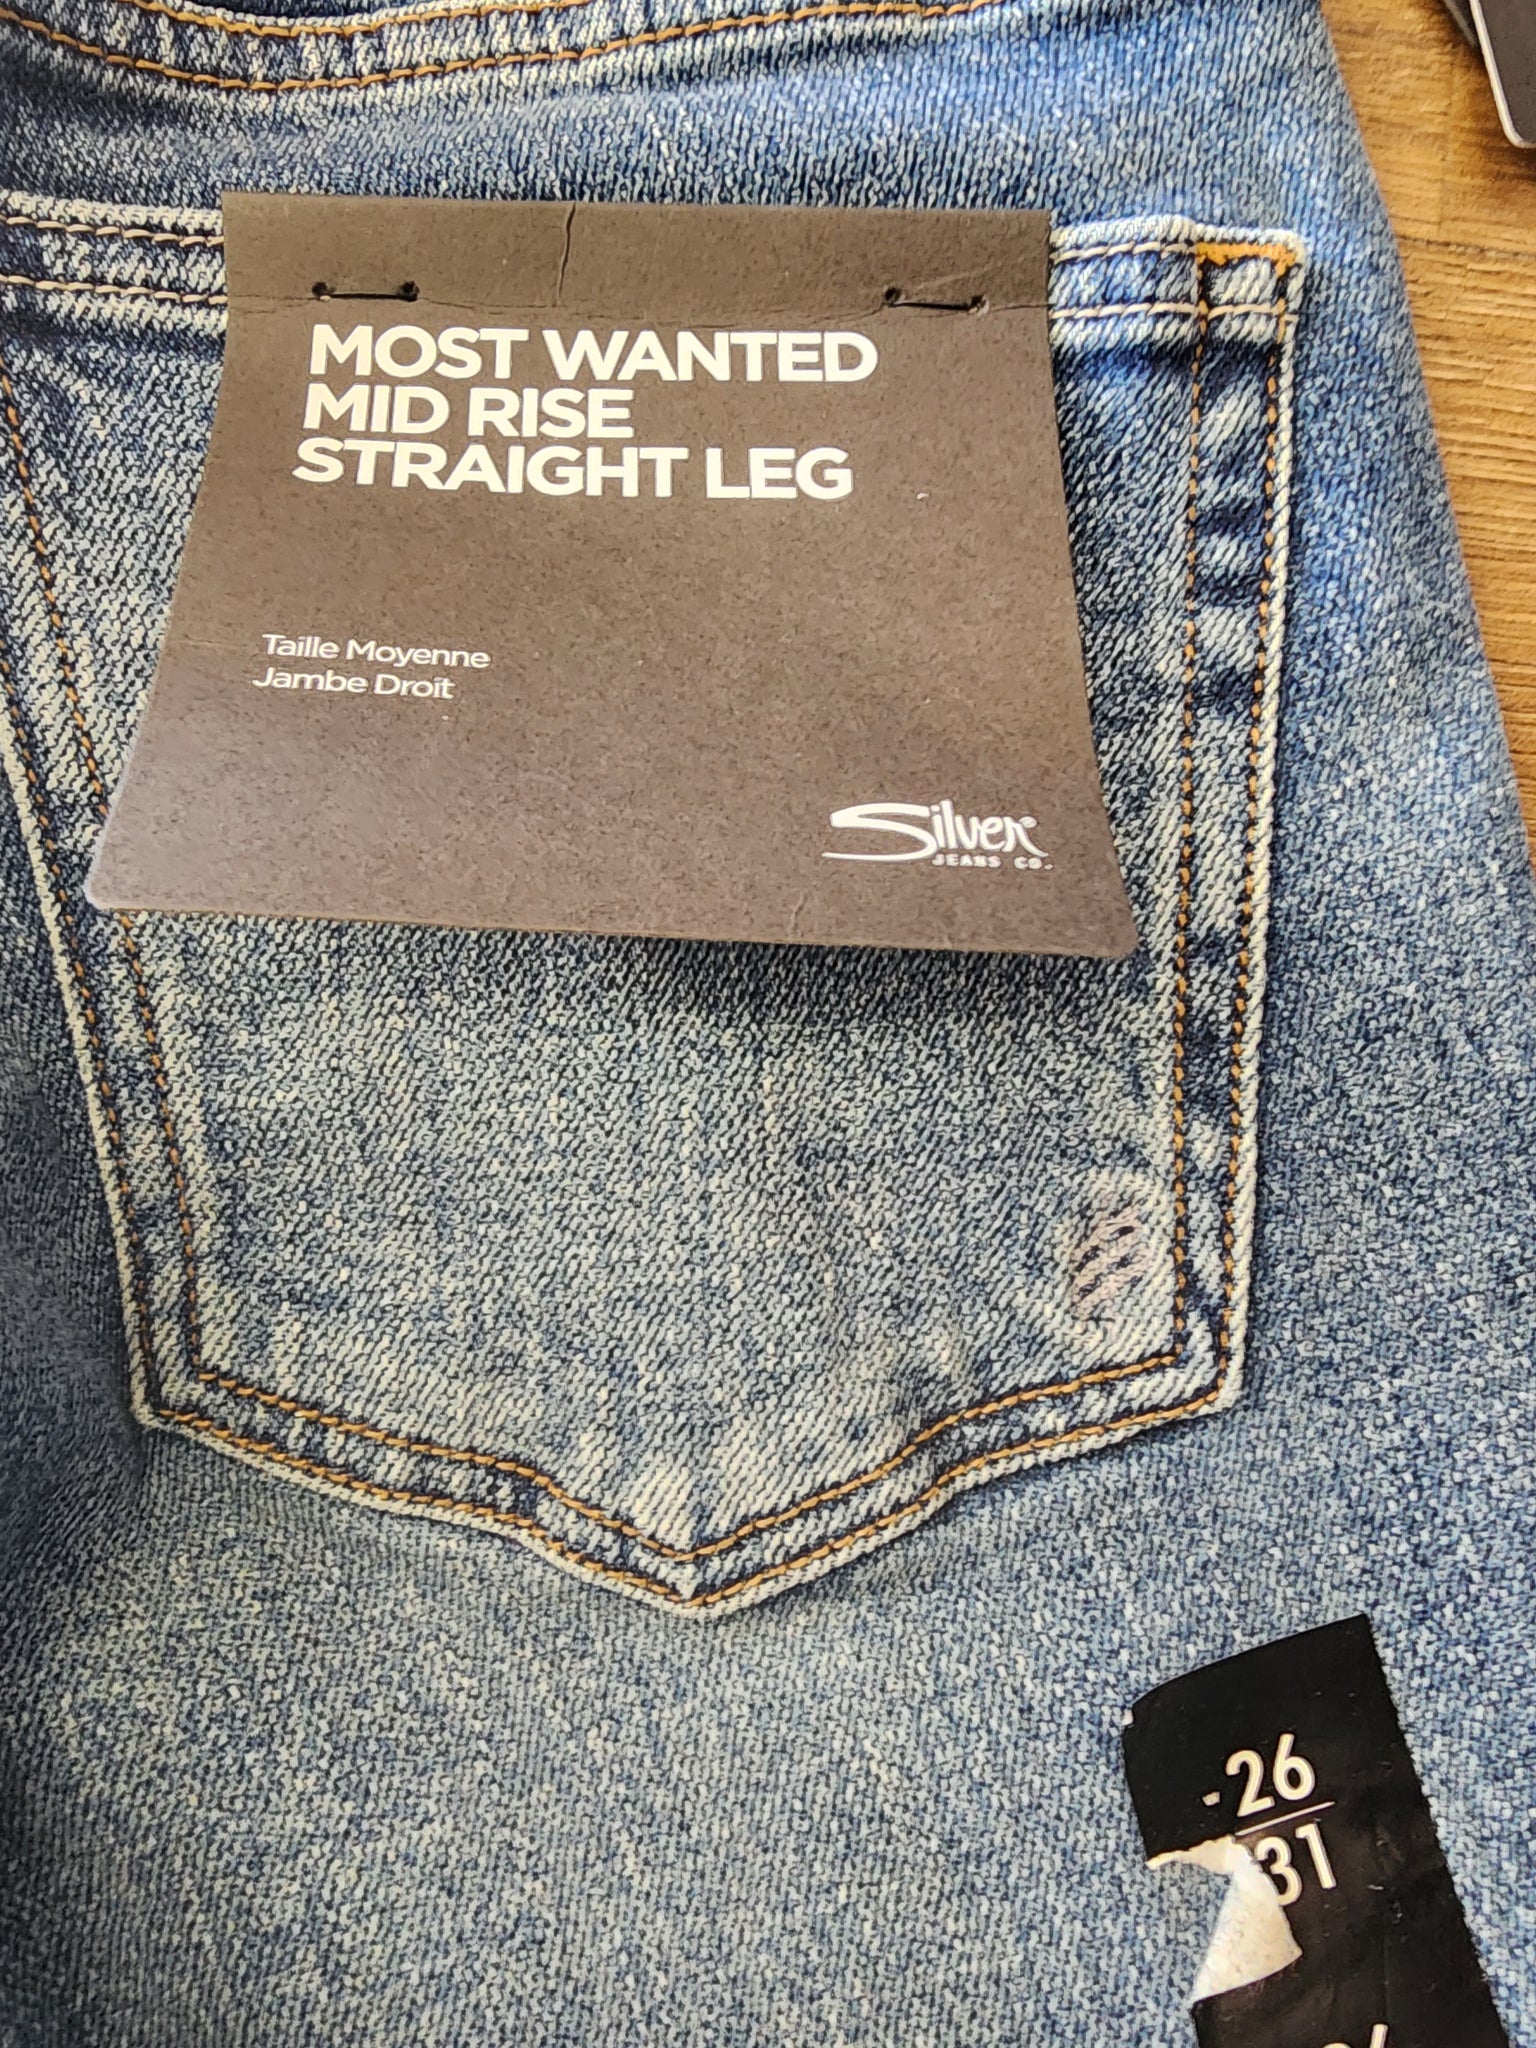 Most wanted straight leg 31 length